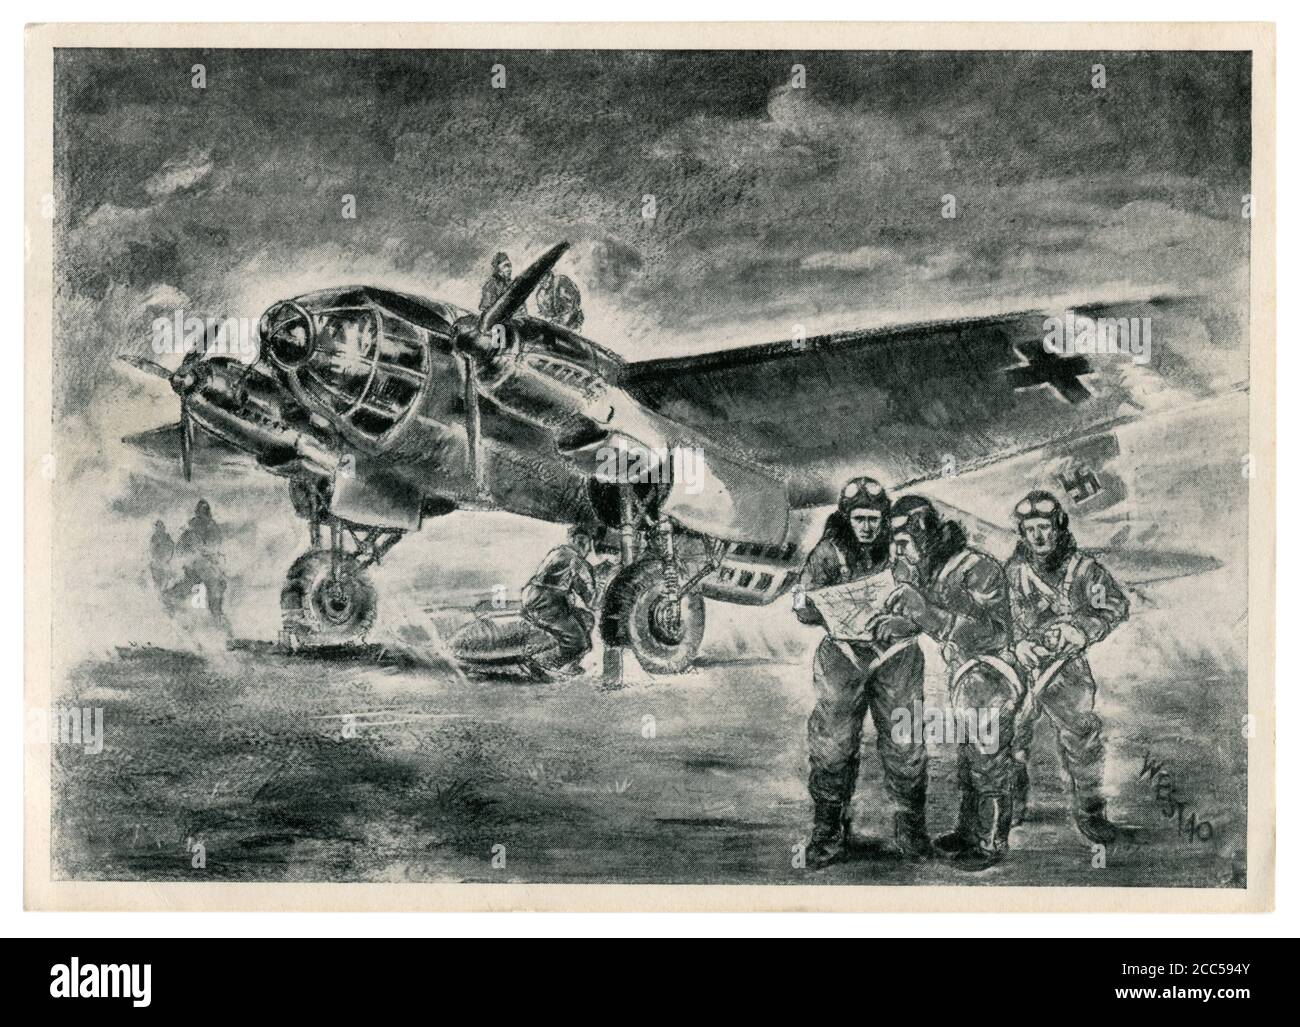 German historical postcard: Technical personnel prepare the Heinkel He 111 Bomber for combat flight. The crew is studying the flight map, ww2, 1940 Stock Photo